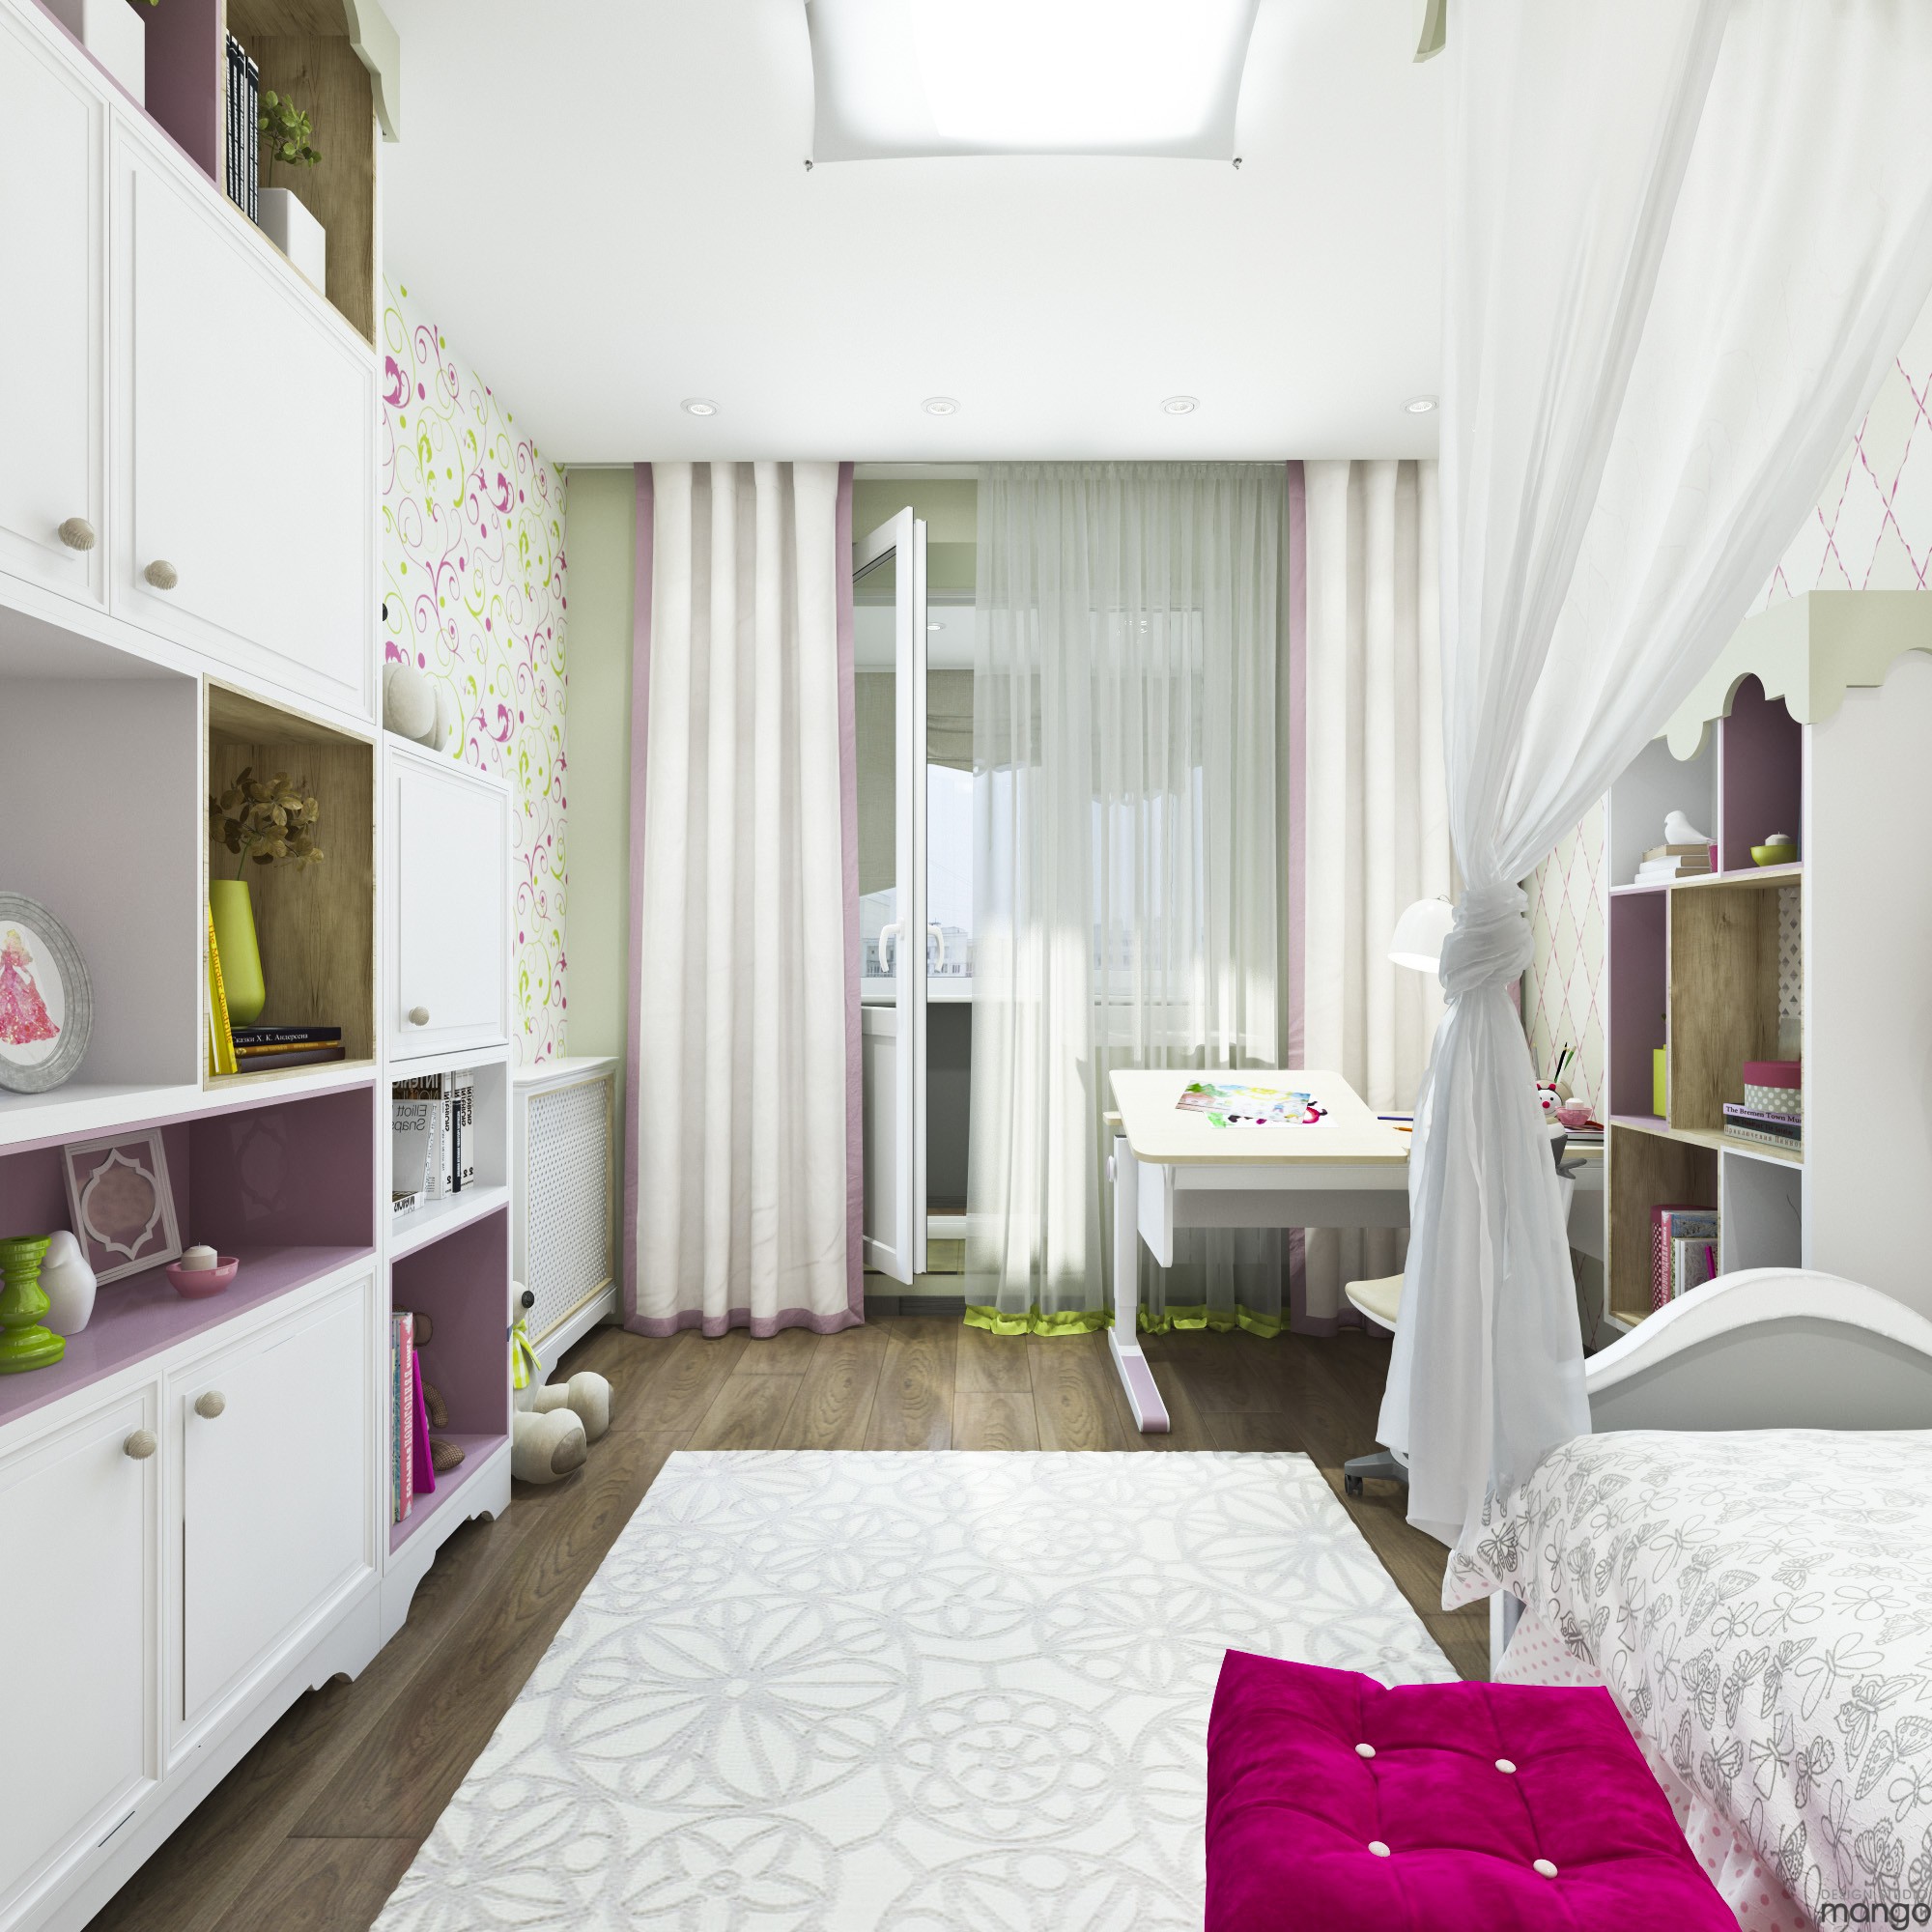 pinky girls room design "width =" 2000 "height =" 2000 "srcset =" https://mileray.com/wp-content/uploads/2020/05/1588508726_251_Variety-of-Kids-Room-Decorating-Ideas-Which-Apply-With-a.jpg 2000w, https: / /mileray.com/wp-content/uploads/2016/11/Design-Studio-Mango2-6-150x150.jpg 150w, https://mileray.com/wp-content/uploads/2016/11/Design-Studio- Mango2-6-300x300.jpg 300w, https://mileray.com/wp-content/uploads/2016/11/Design-Studio-Mango2-6-768x768.jpg 768w, https://mileray.com/wp- content / uploads / 2016/11 / Design-Studio-Mango2-6-1024x1024.jpg 1024w, https://mileray.com/wp-content/uploads/2016/11/Design-Studio-Mango2-6-696x696.jpg 696w, https://mileray.com/wp-content/uploads/2016/11/Design-Studio-Mango2-6-1068x1068.jpg 1068w, https://mileray.com/wp-content/uploads/2016/11 /Design-Studio-Mango2-6-420x420.jpg 420w "sizes =" (maximum width: 2000px) 100vw, 2000px